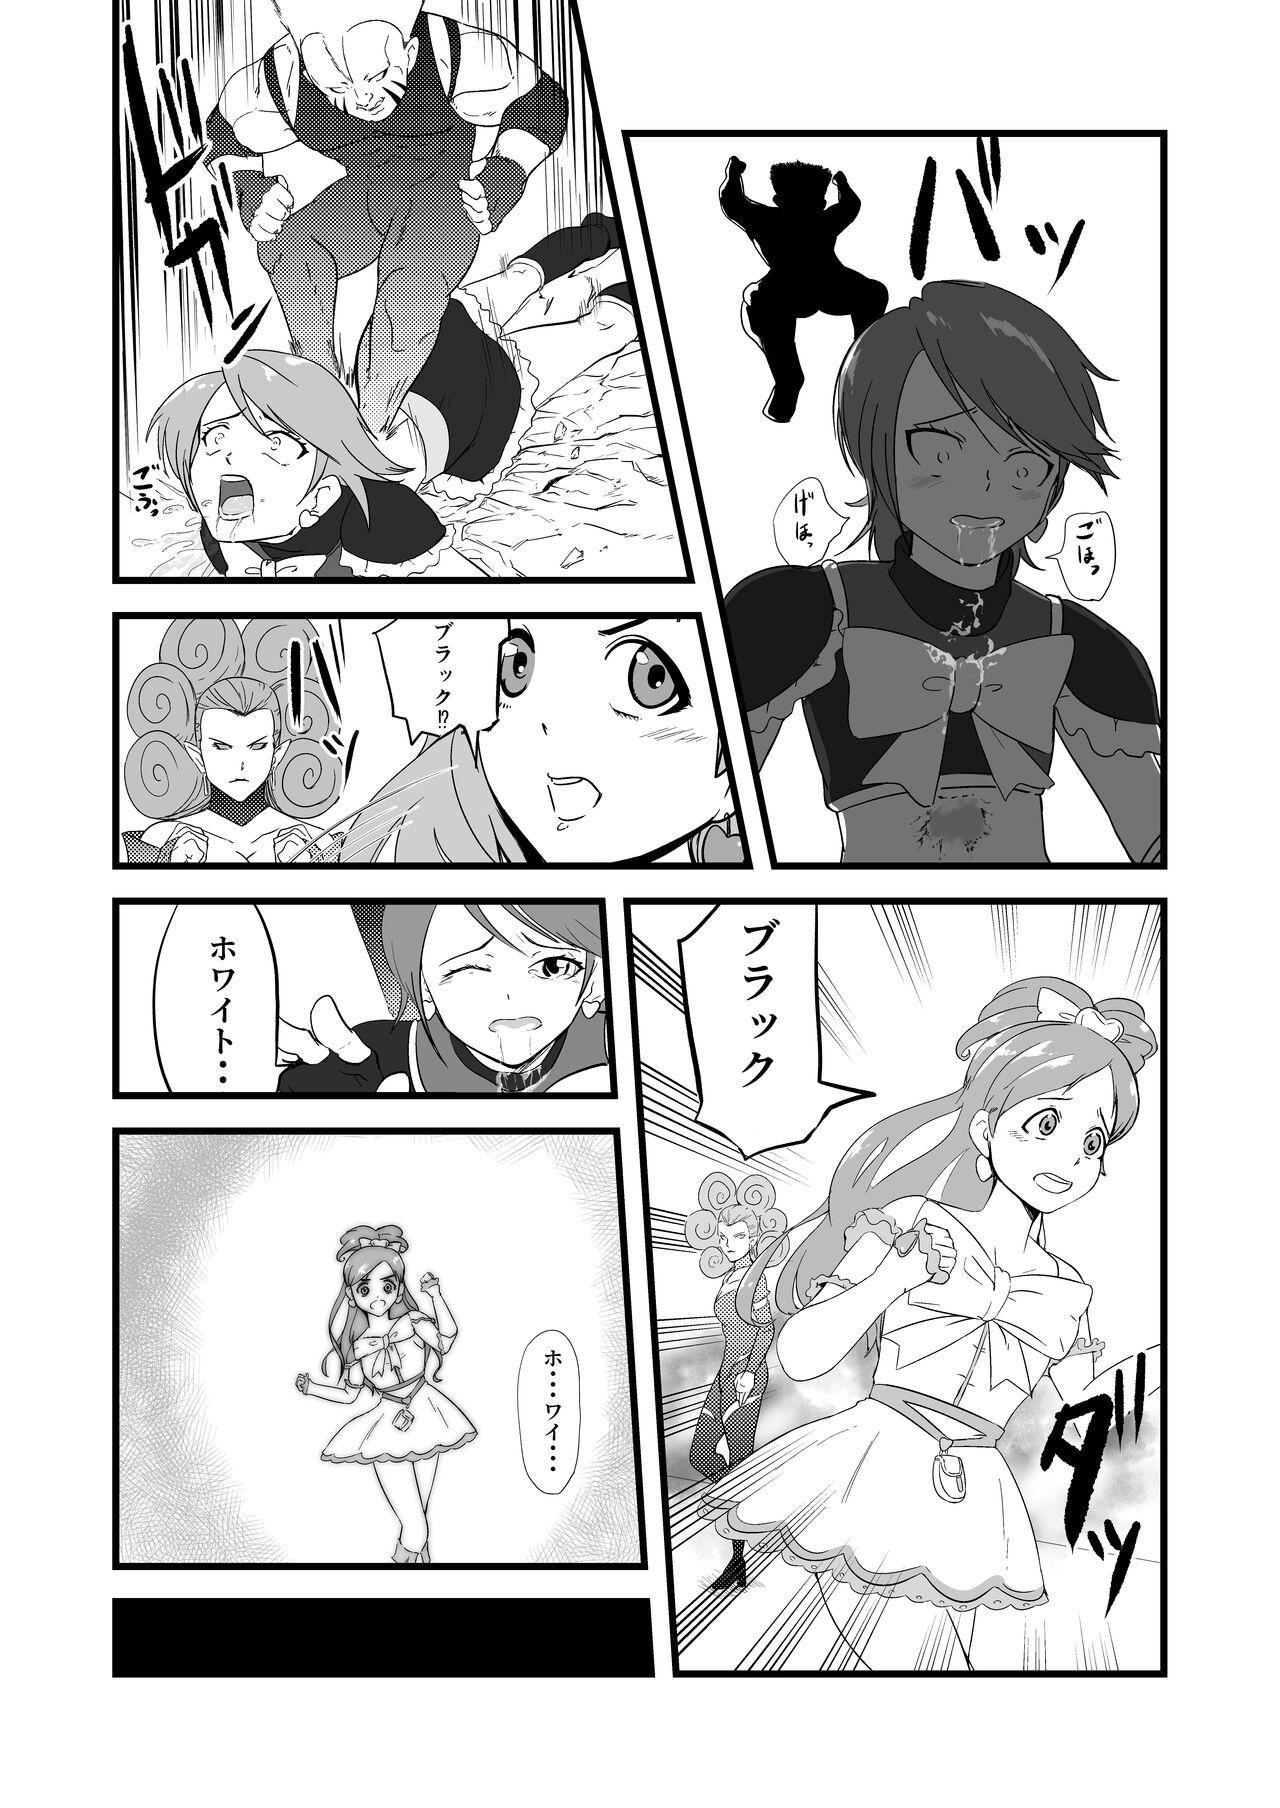 Dance Belly Crisis 7 - Pretty cure Stepbrother - Page 4